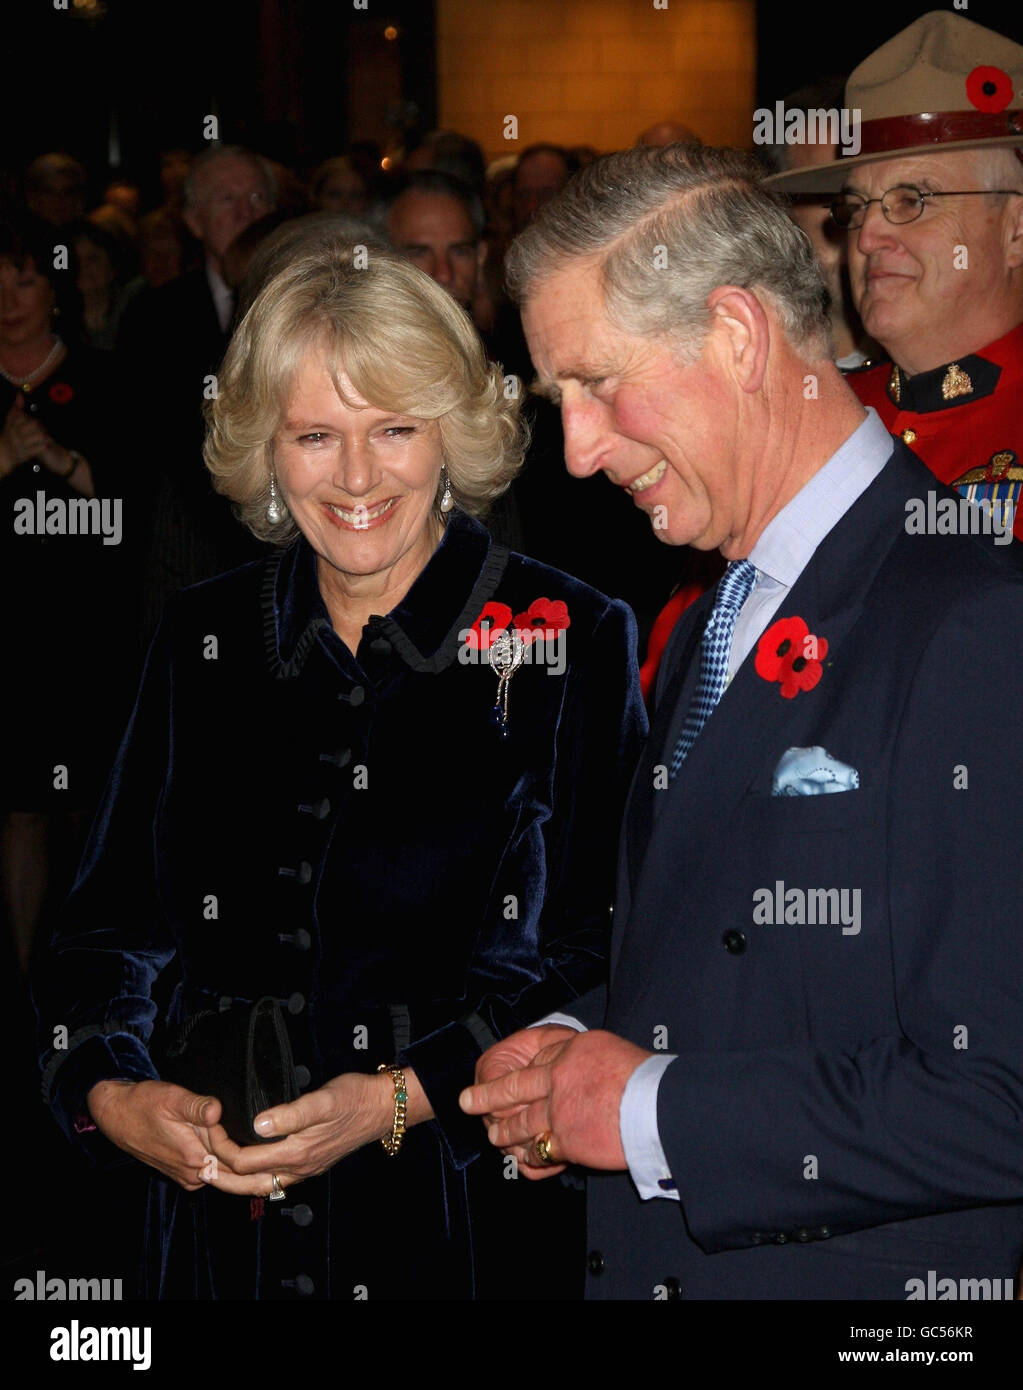 The Duchess of Cornwall and The Prince of Wales smile during a reception at 'The Rooms' in Saint John's, Newfoundland, as part of their visit to Canada. Stock Photo